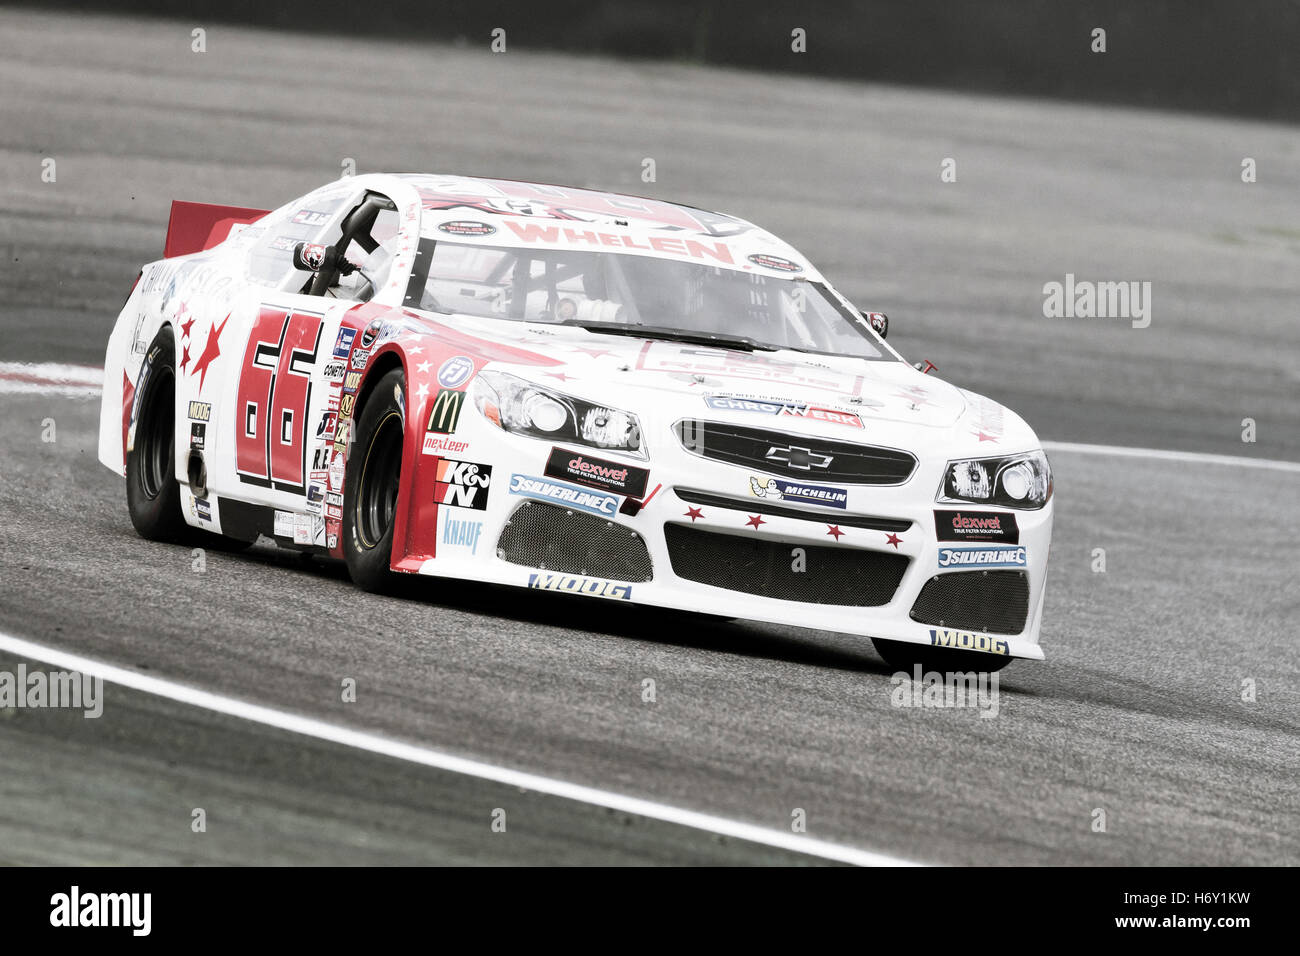 Adria, Rovigo, Italy - September 17, 2016: DF-1 Racing Team, driven by Hunt Freddie,  during race at the Nascar Whelen Euro Stock Photo